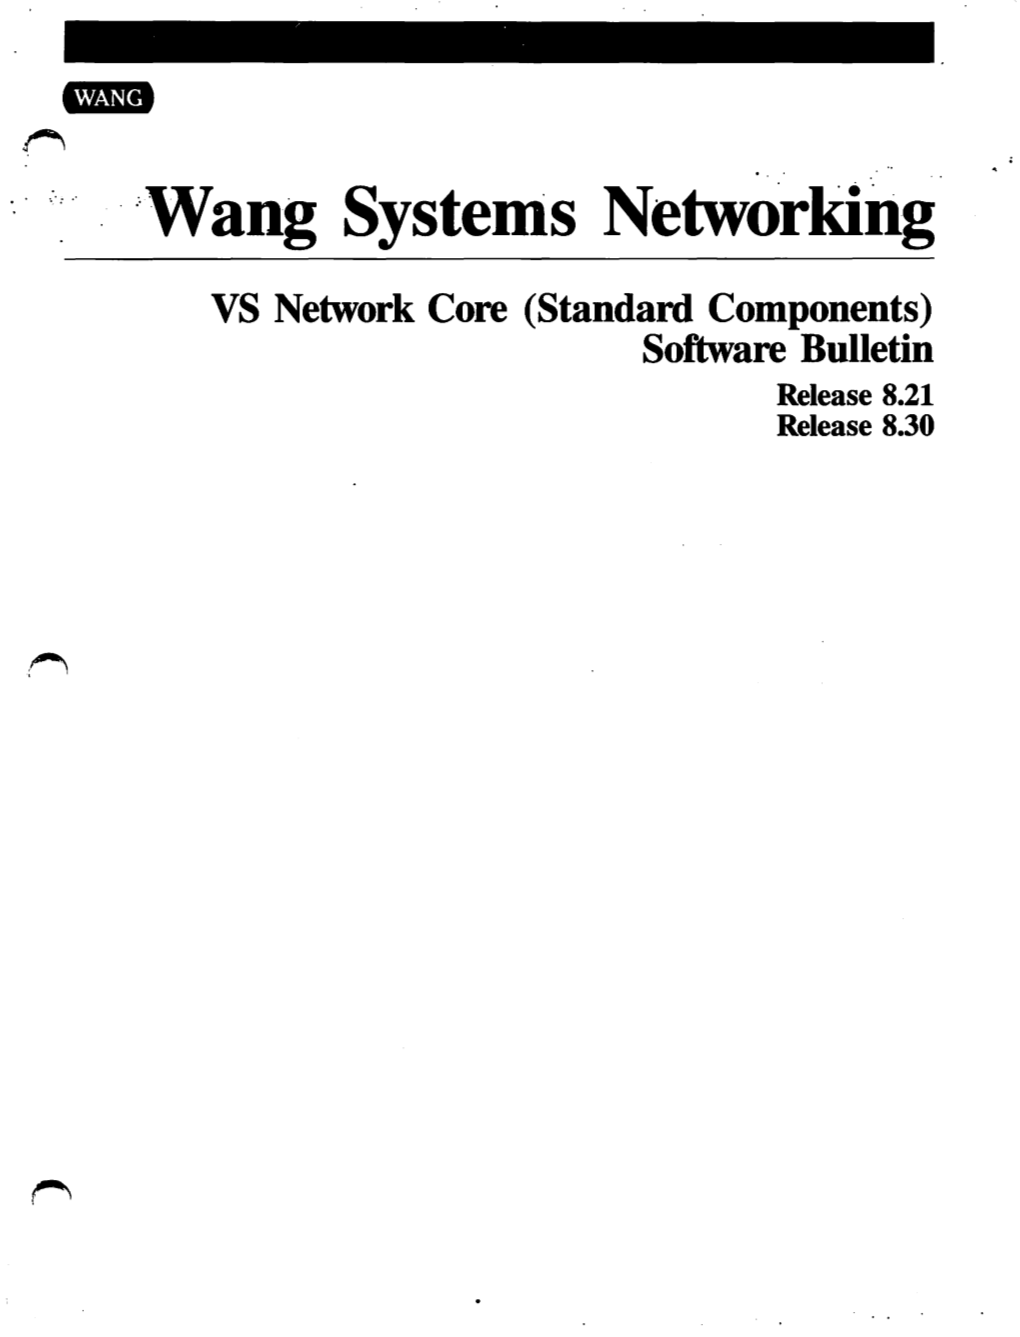 Wang Systems Networking VS Network Core (Standard Components) Software Bulletin Release 8.21 Release 8.30